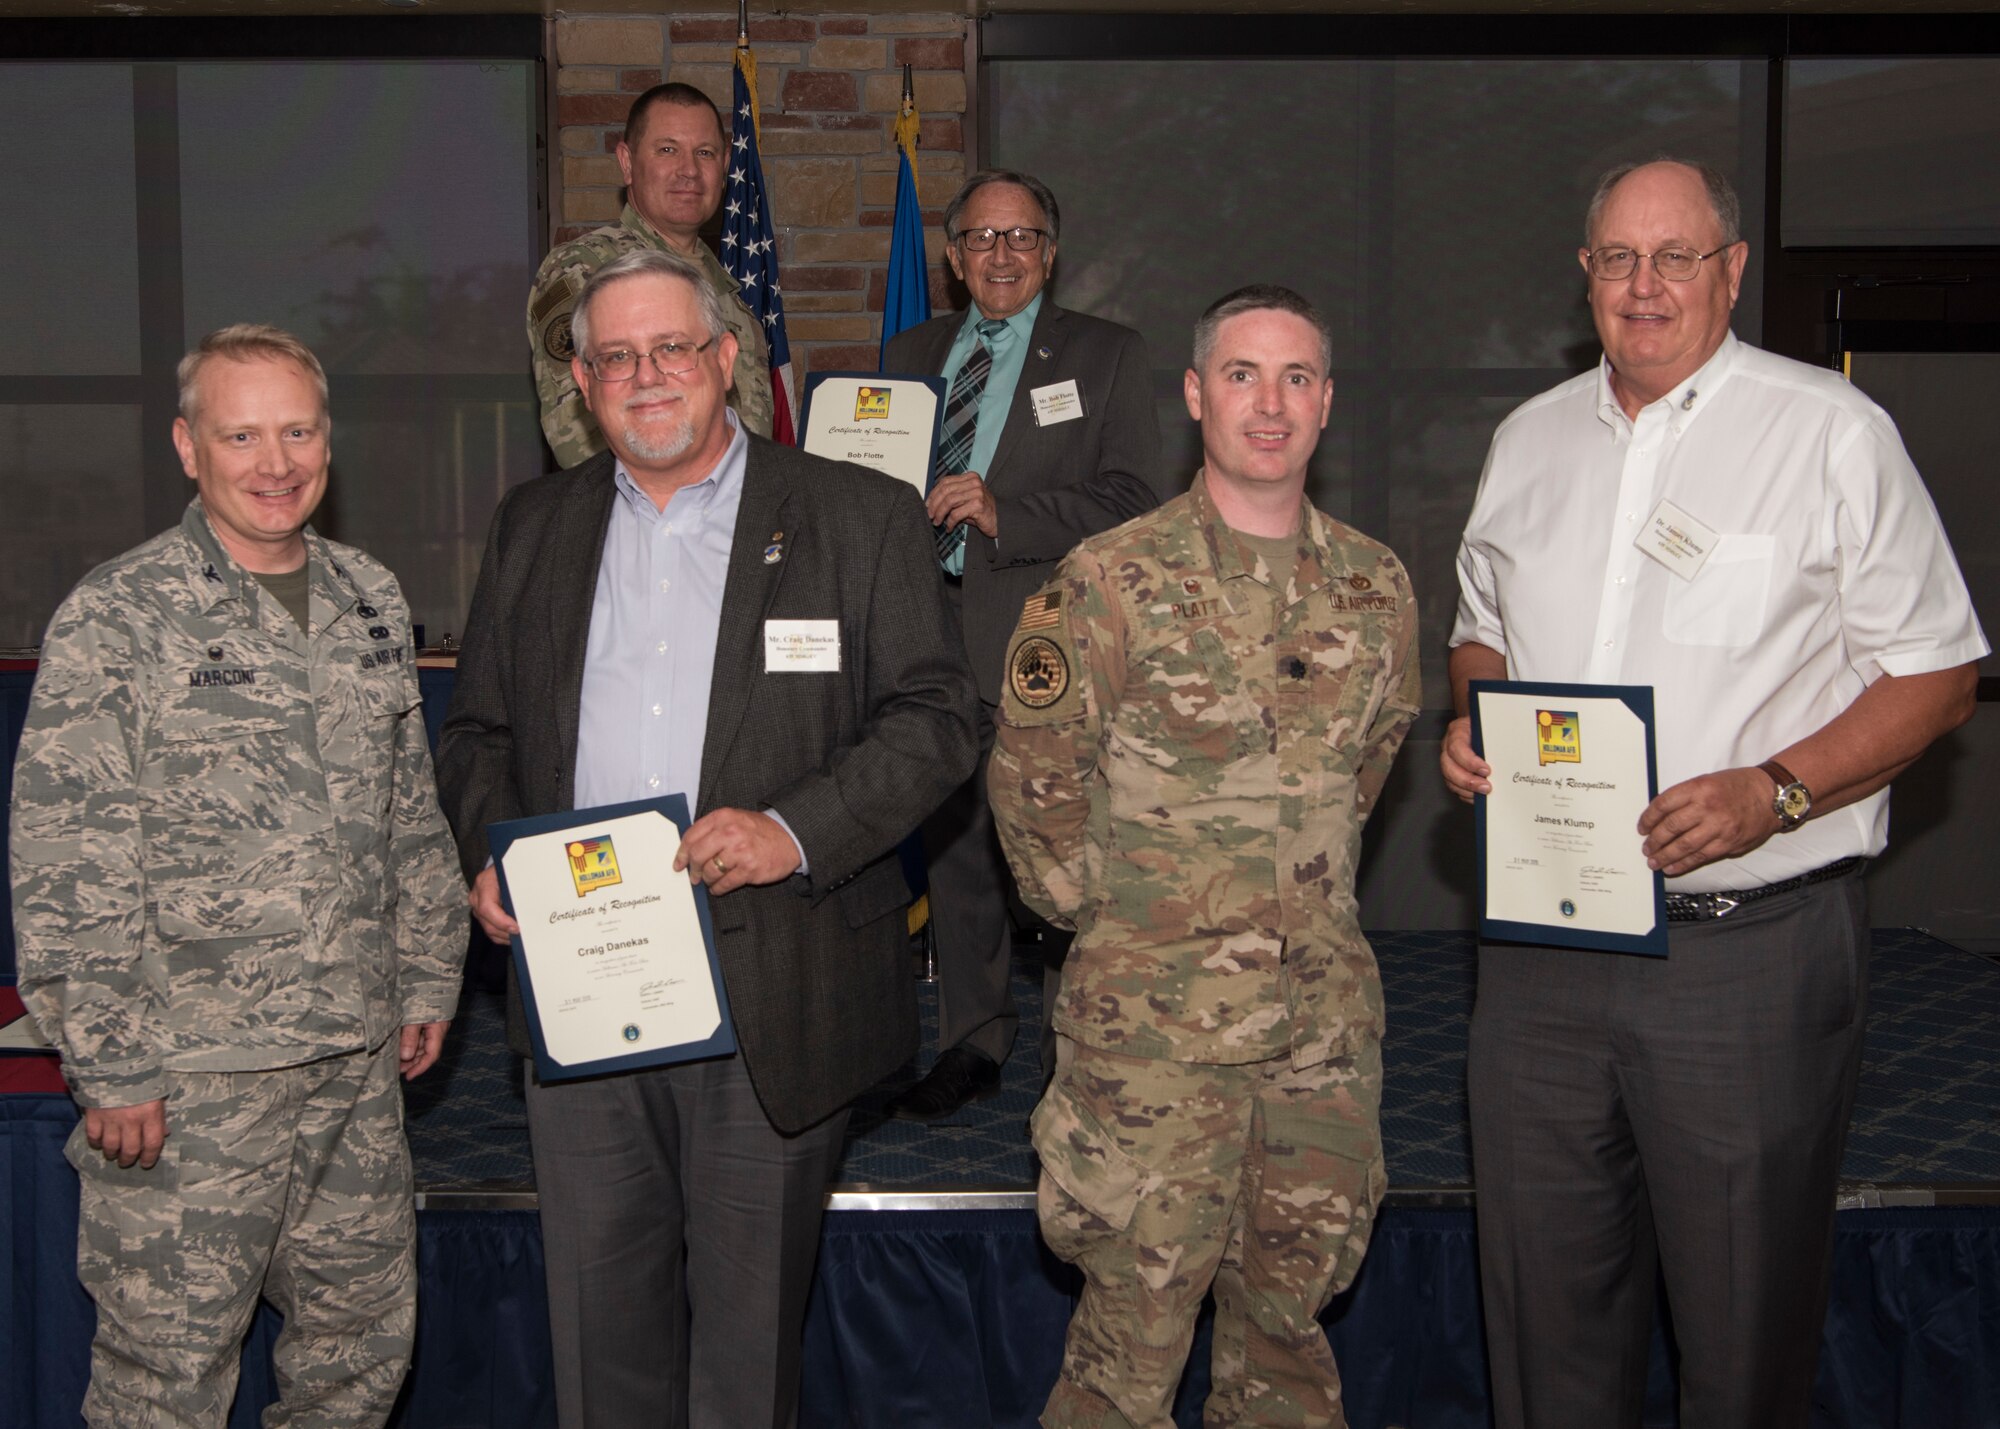 Commanders and honorary commanders from the 635th Materiel Maintenance Group pose for a photo, May 31, 2019, on Holloman Air Force Base, N.M. The honorary commander program establishes and maintains personal relationships with local civic leaders, and aids in increasing public awareness of the missions, policies and programs of the Department of Defense and United States Air Force. (U.S. Air Force photo by Staff Sgt. BreeAnn Sachs)